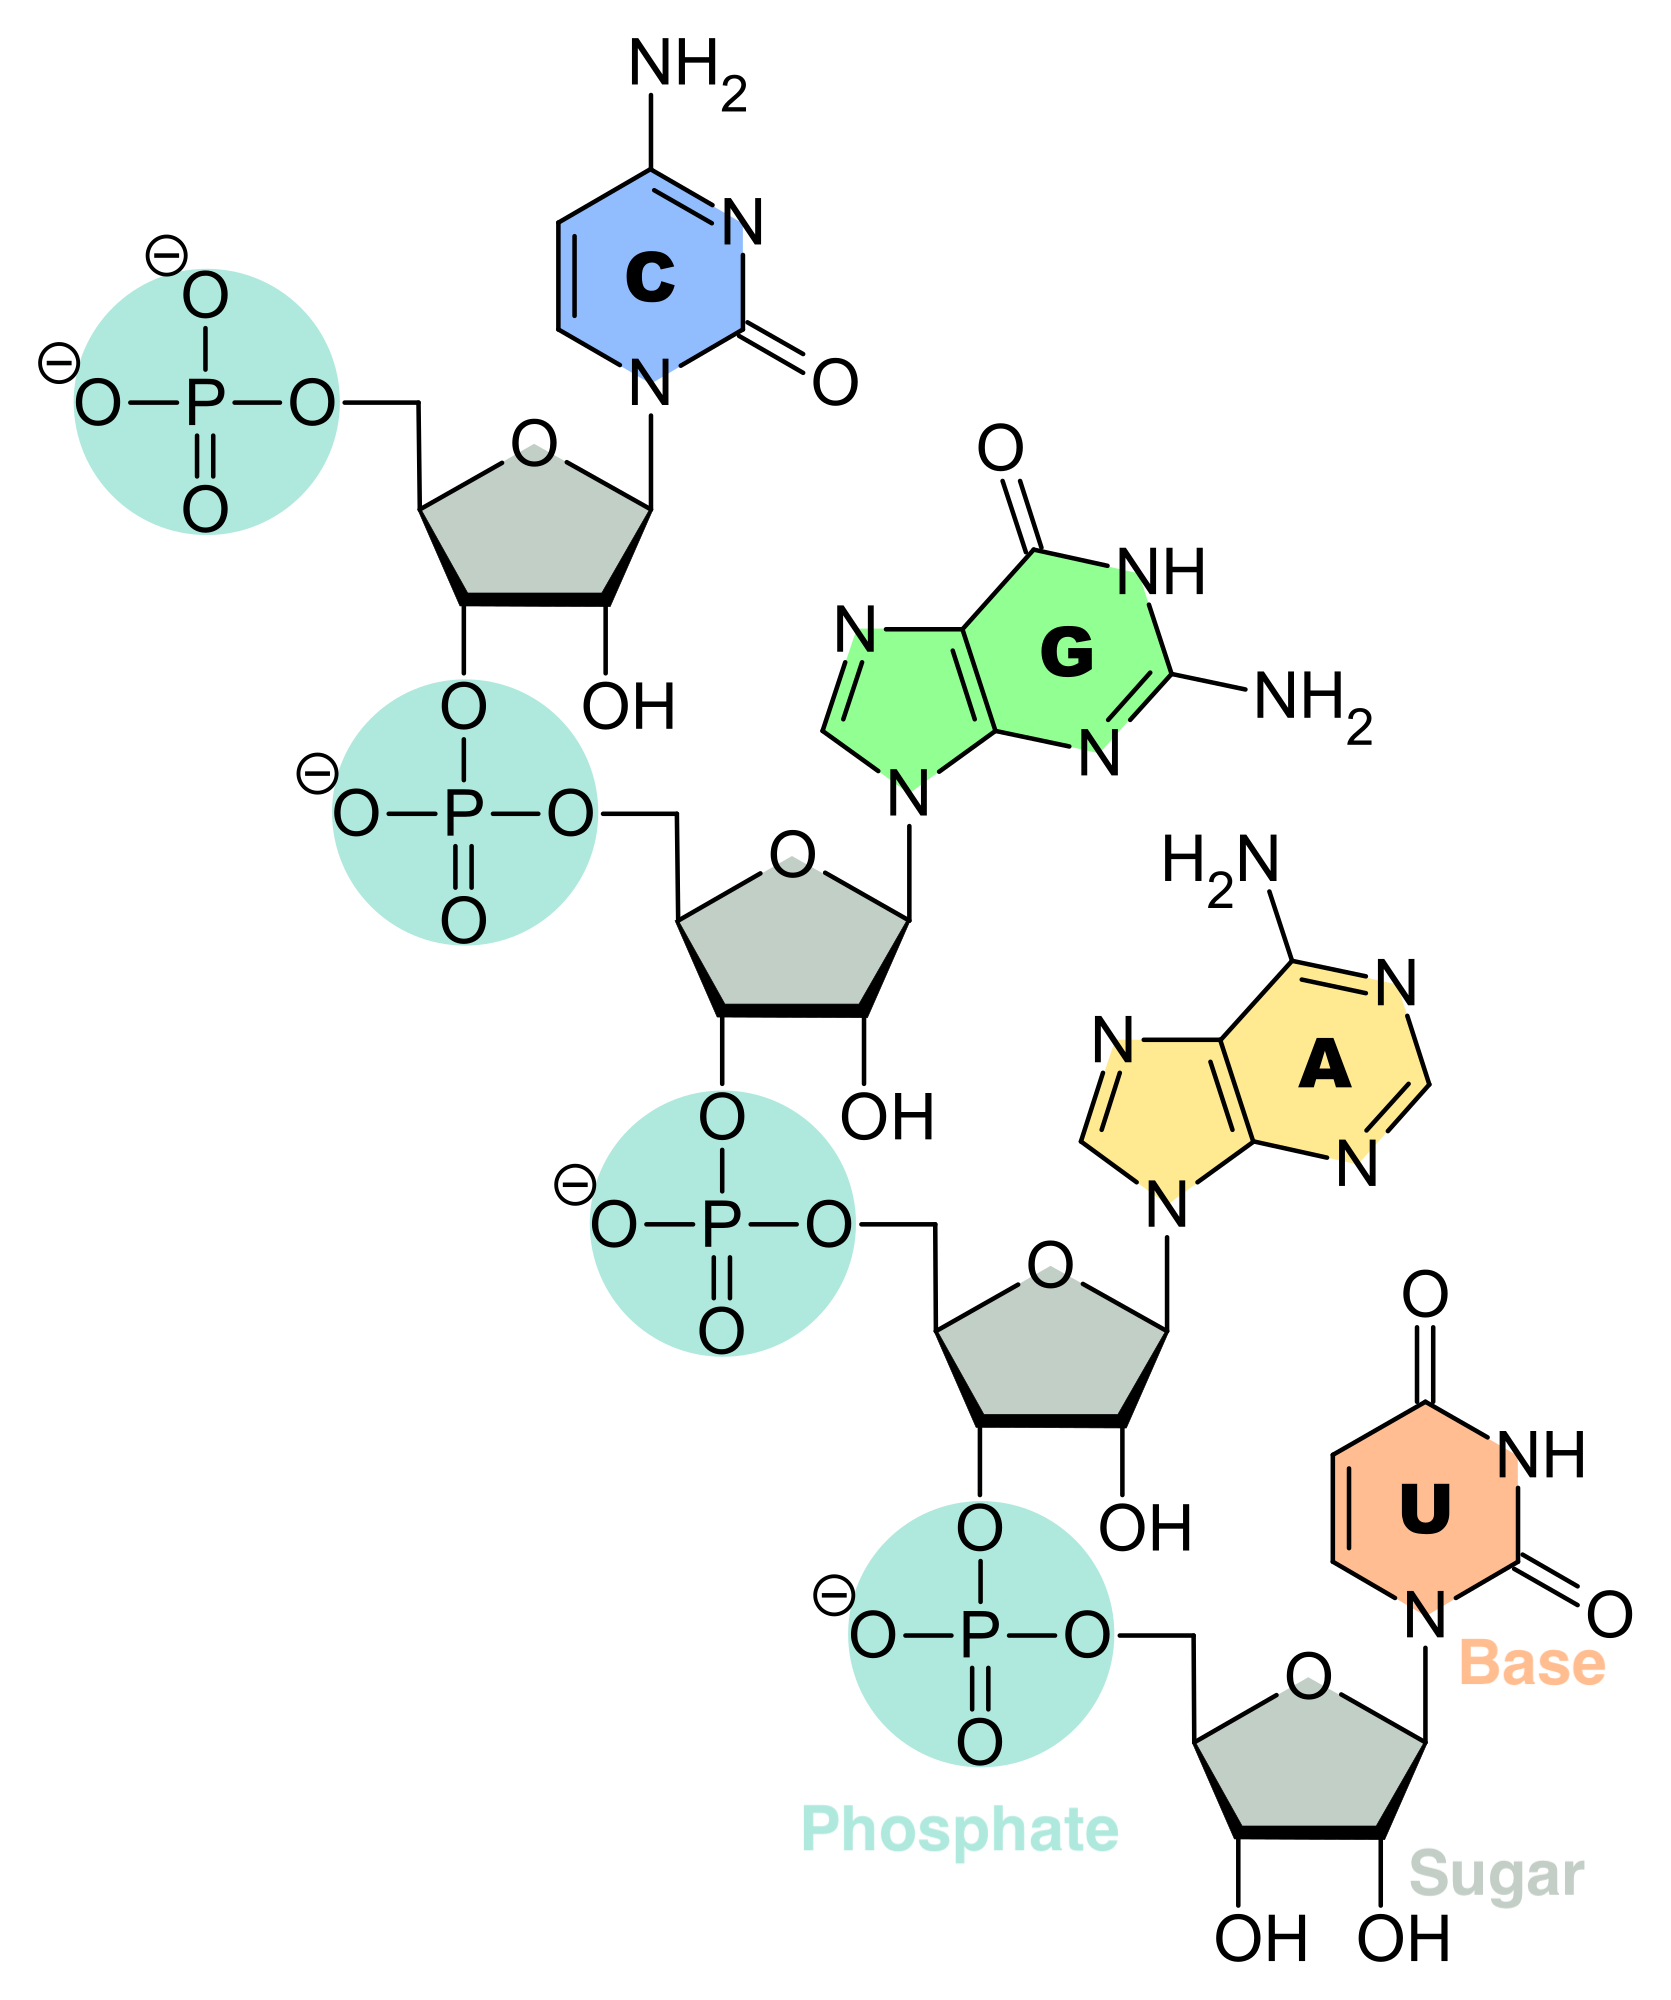 RNA is a polymeric molecule with various biological roles in coding, decoding, regulation and expression of genes. RNA consists of a chain of nucleotides. Each nucleotide is build from a ribose sugar that forms the backbone of the RNA  polymer, a phosphate group that is used to connect the ribose sugar molecules and a base adenine (A), cytosine (C), guanine (G) or uracil (U) that are the carriers of information. The bases can form hydrogen bonds between cytosine and guanine, between adenine and uracil, and, between adenine and thymine (a base from DNA) (Source: Adapted from Wikipedia)